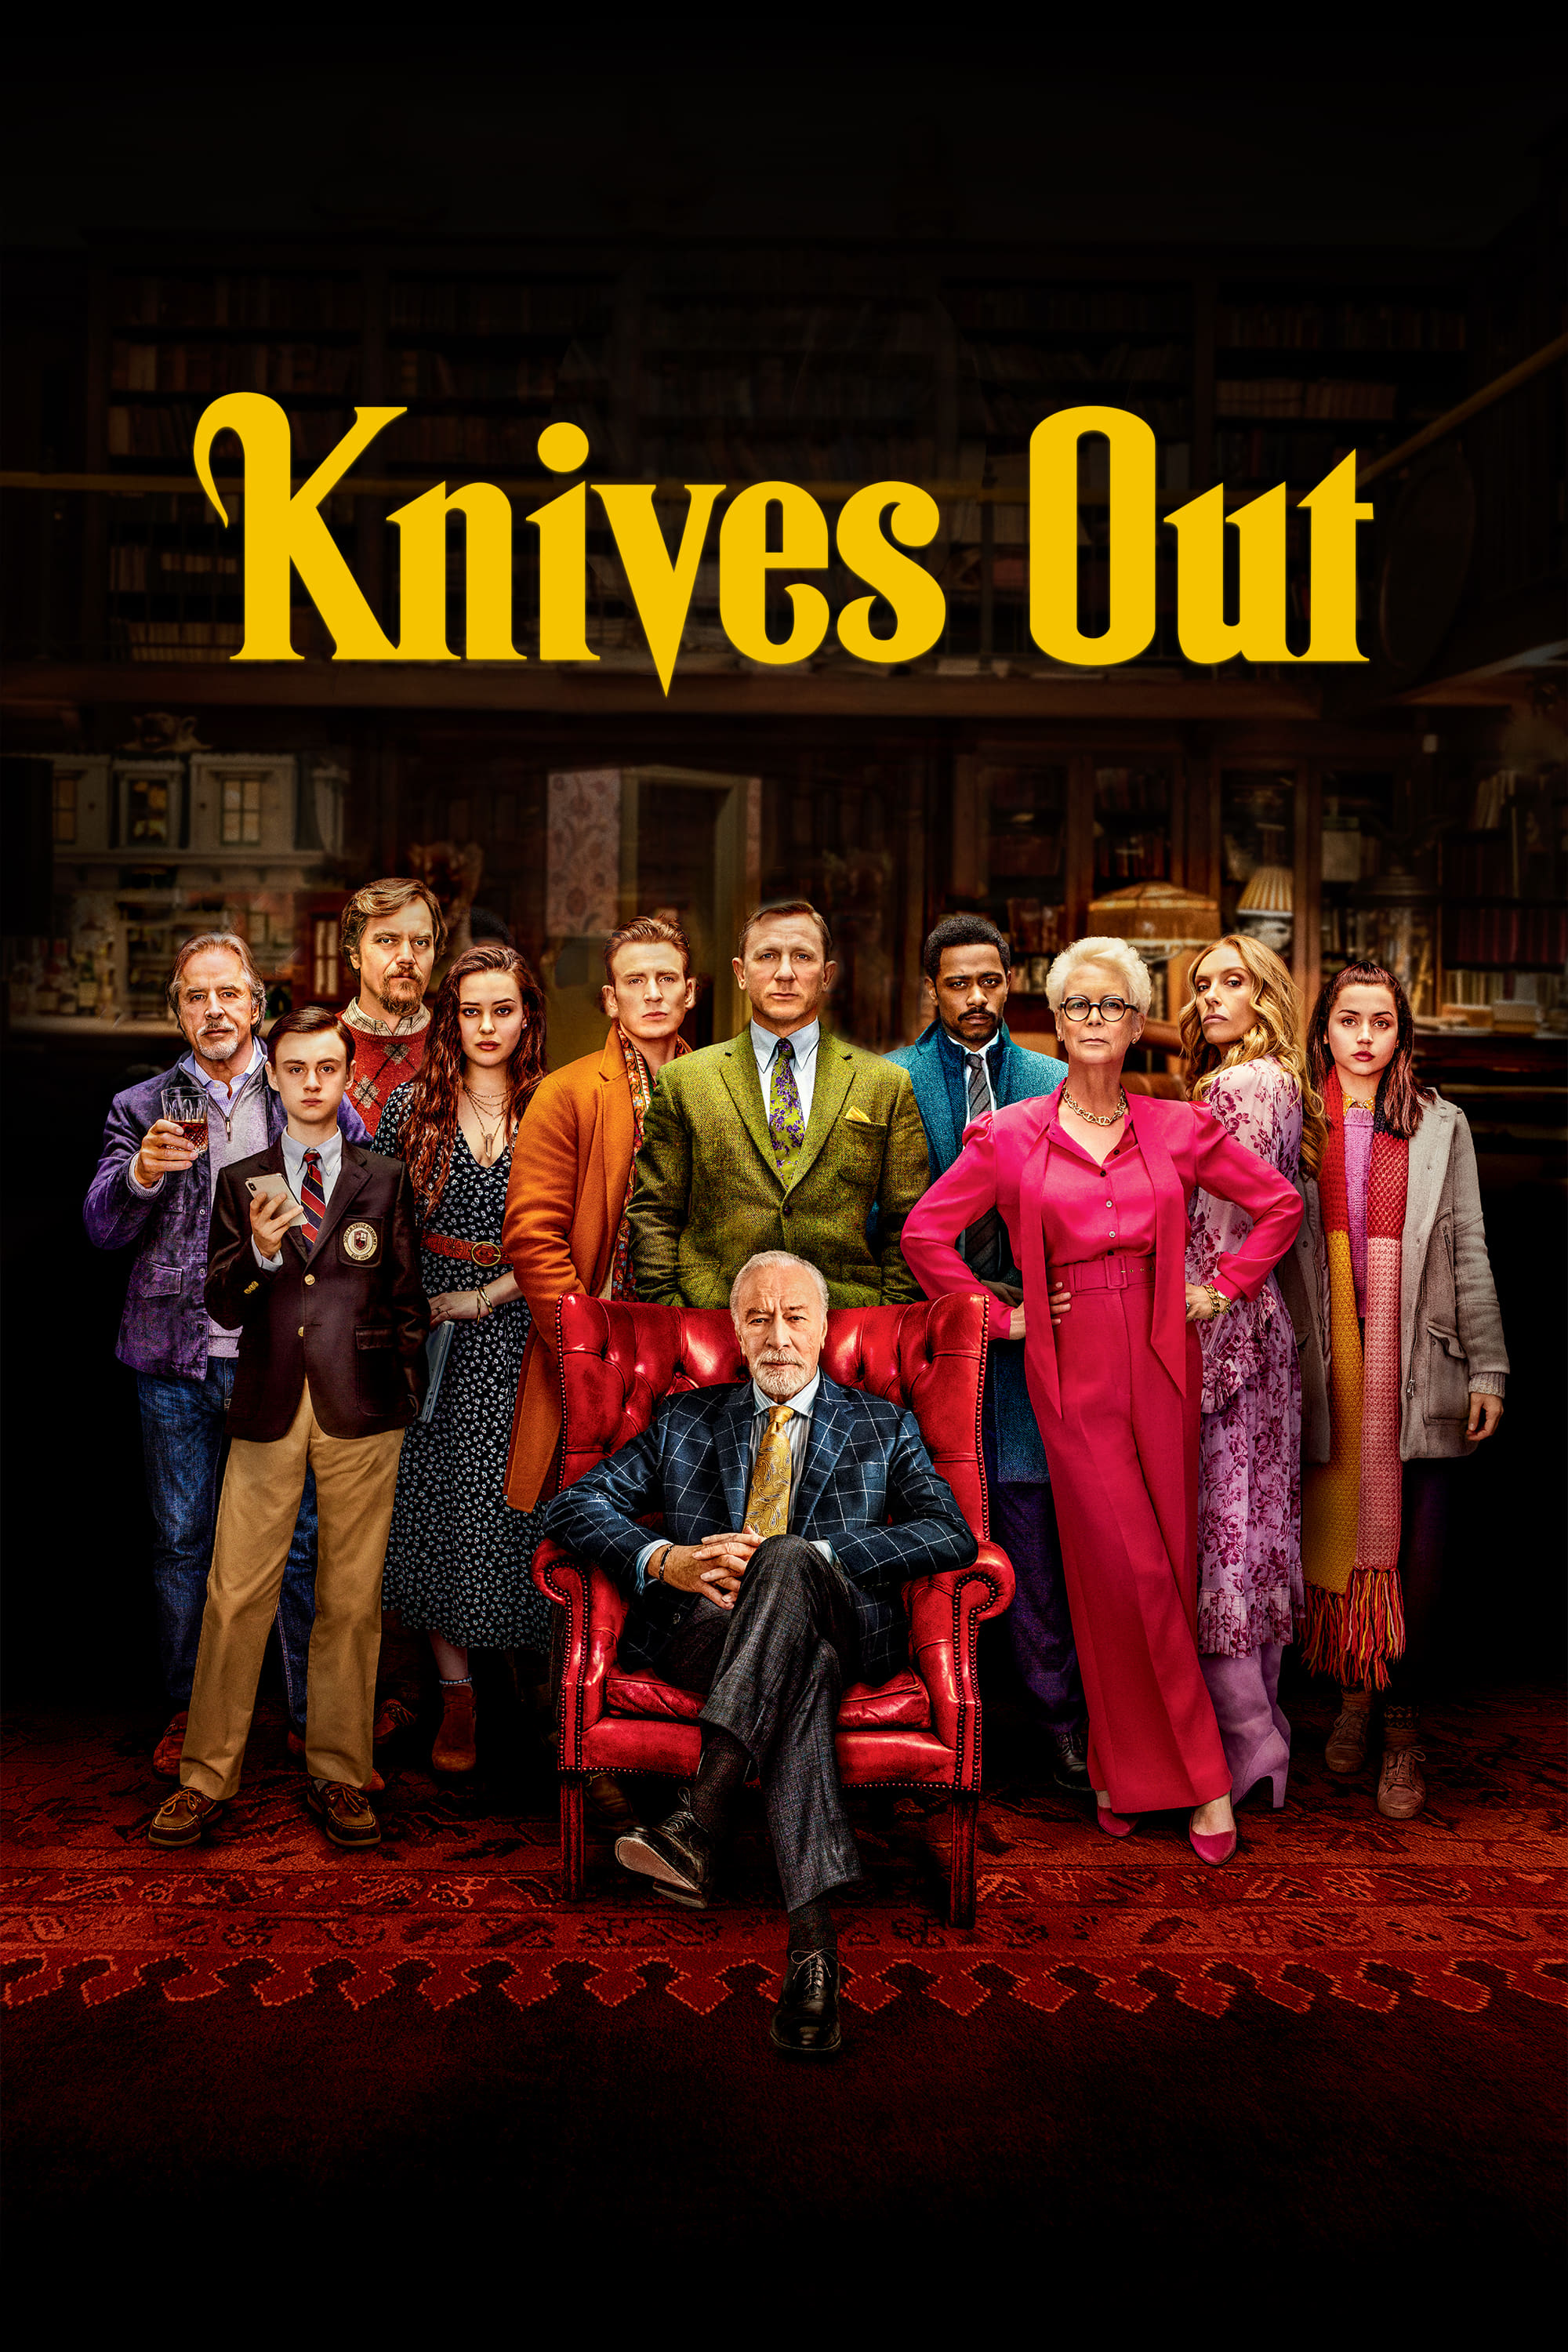 movie review for knives out